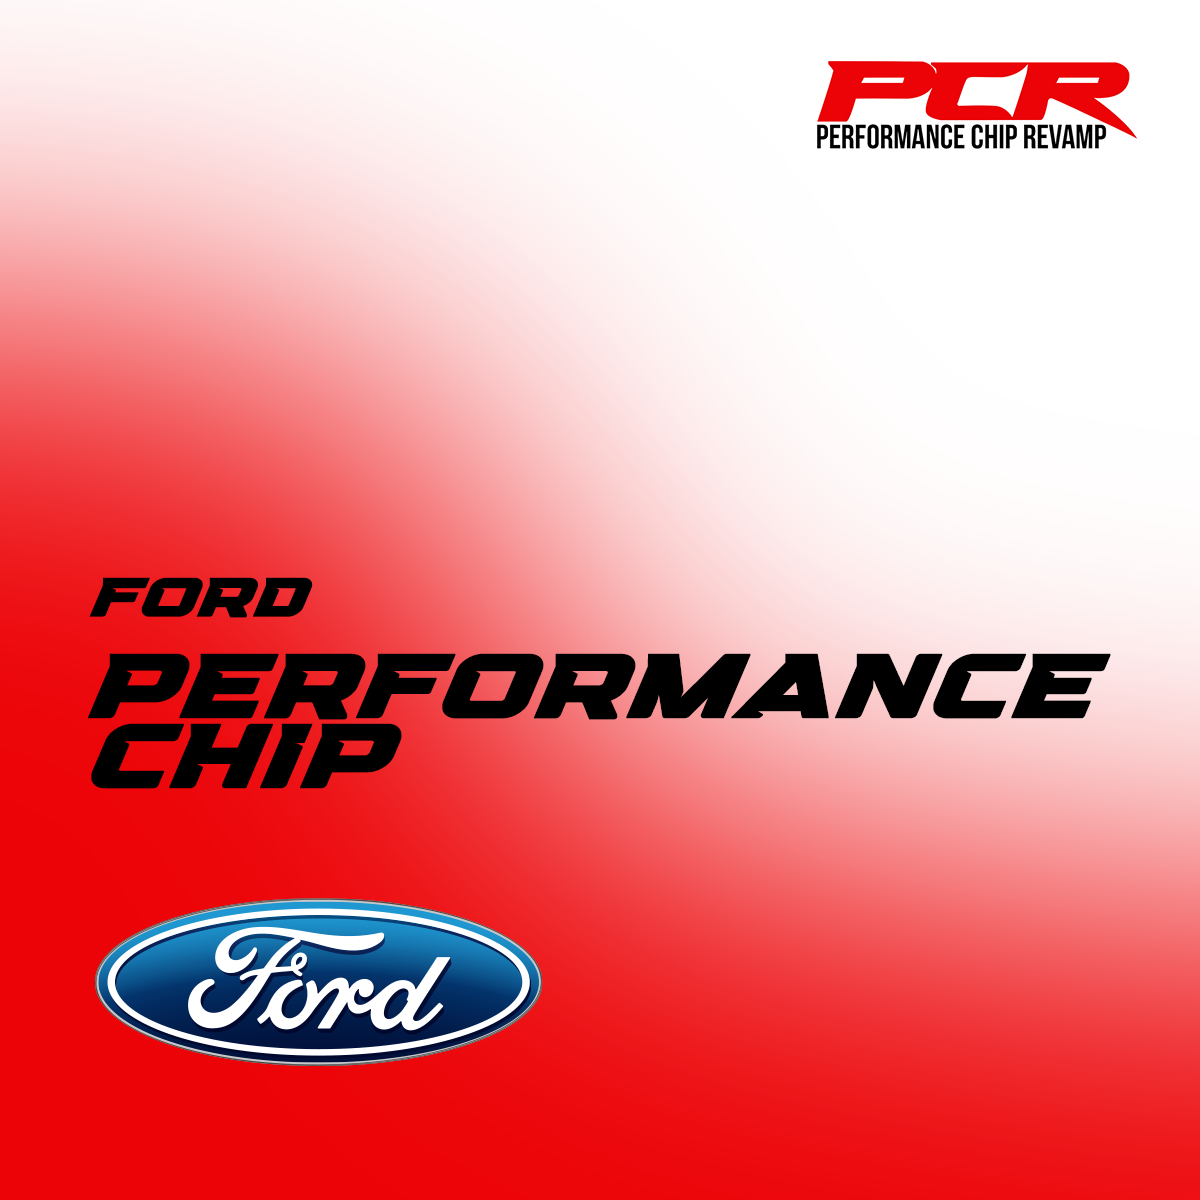 Ford Transit Cargo Performance Chip